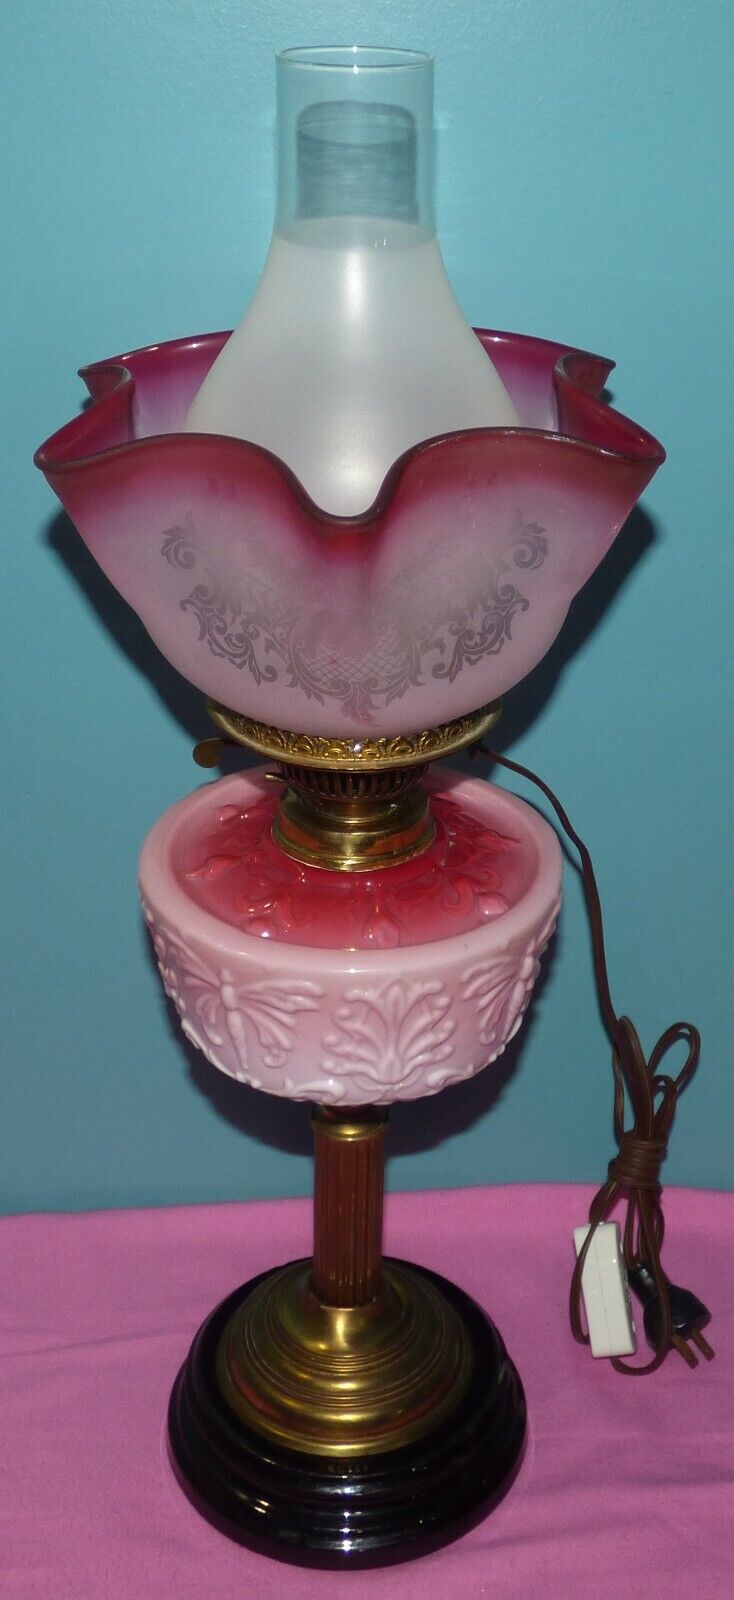 Antique Veritas Victorian Oil Lamp with Cherub Acid Etched Shade Dragon Fly Font